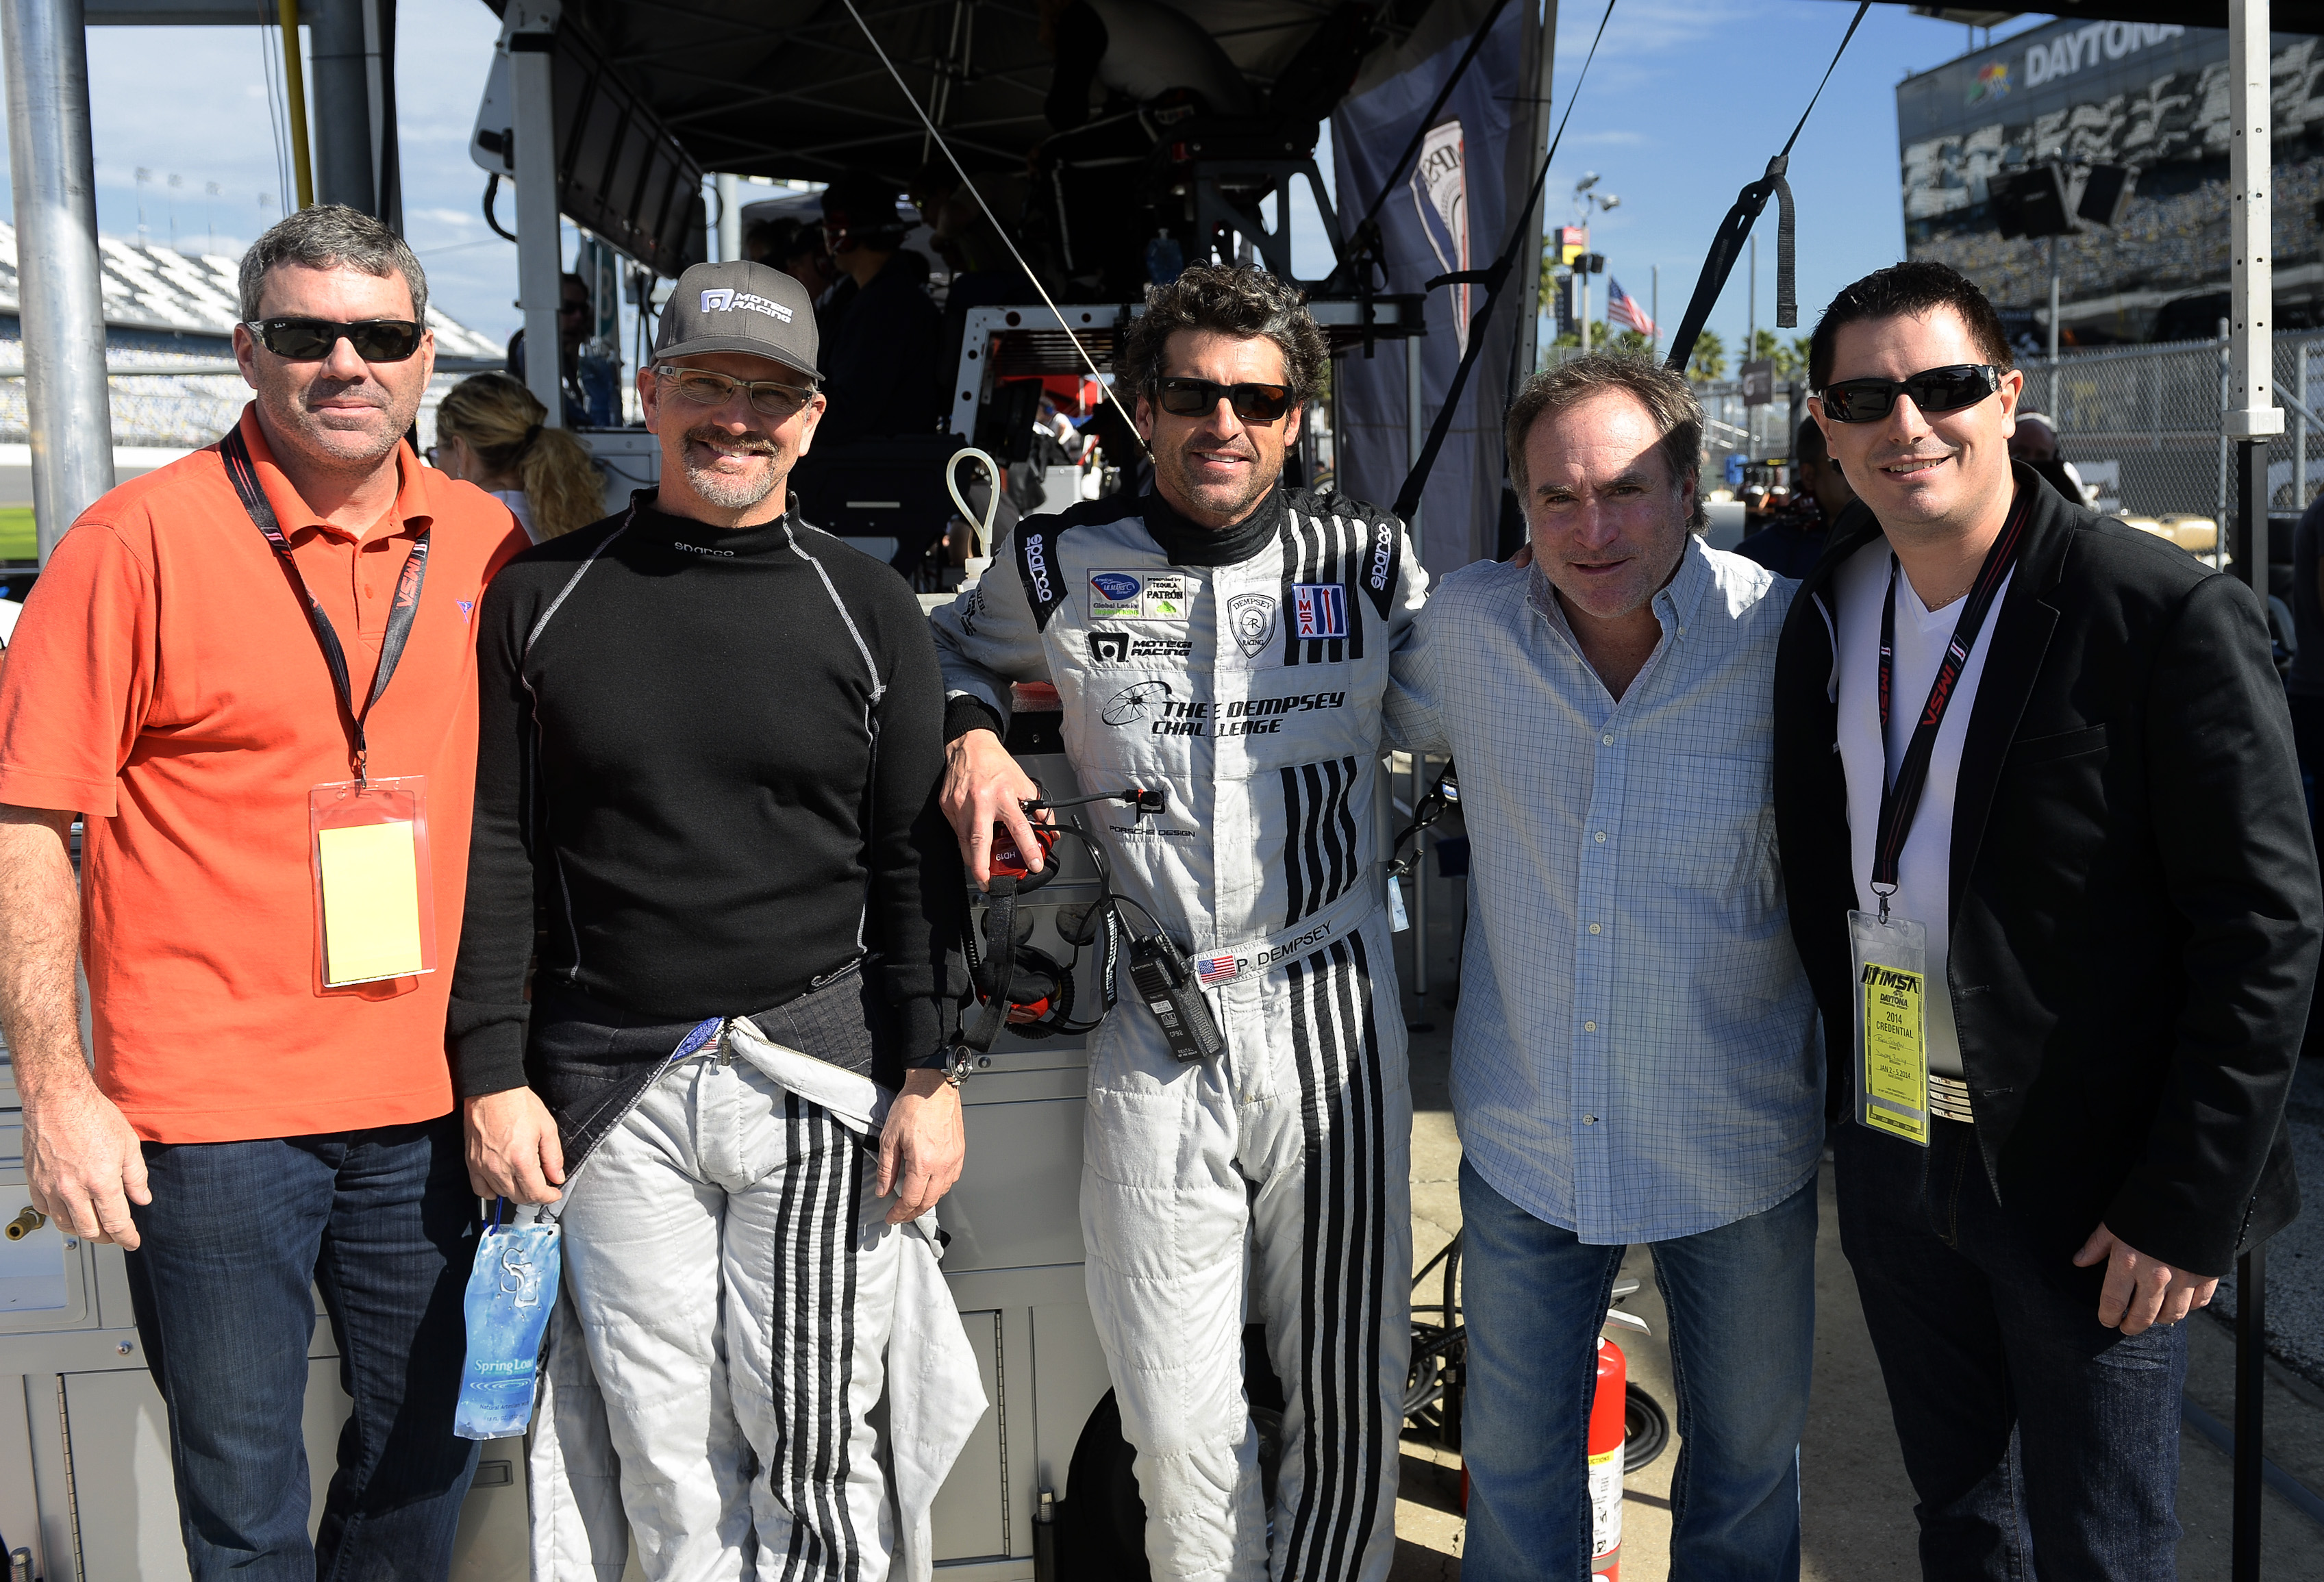 Ryan with actor and driver Patrick Dempsey at the Daytona International Speedway in January 2014, testing for the Rolex 24 hour race that took place later in the month. Ryan was with his partners of Spring Loaded water.